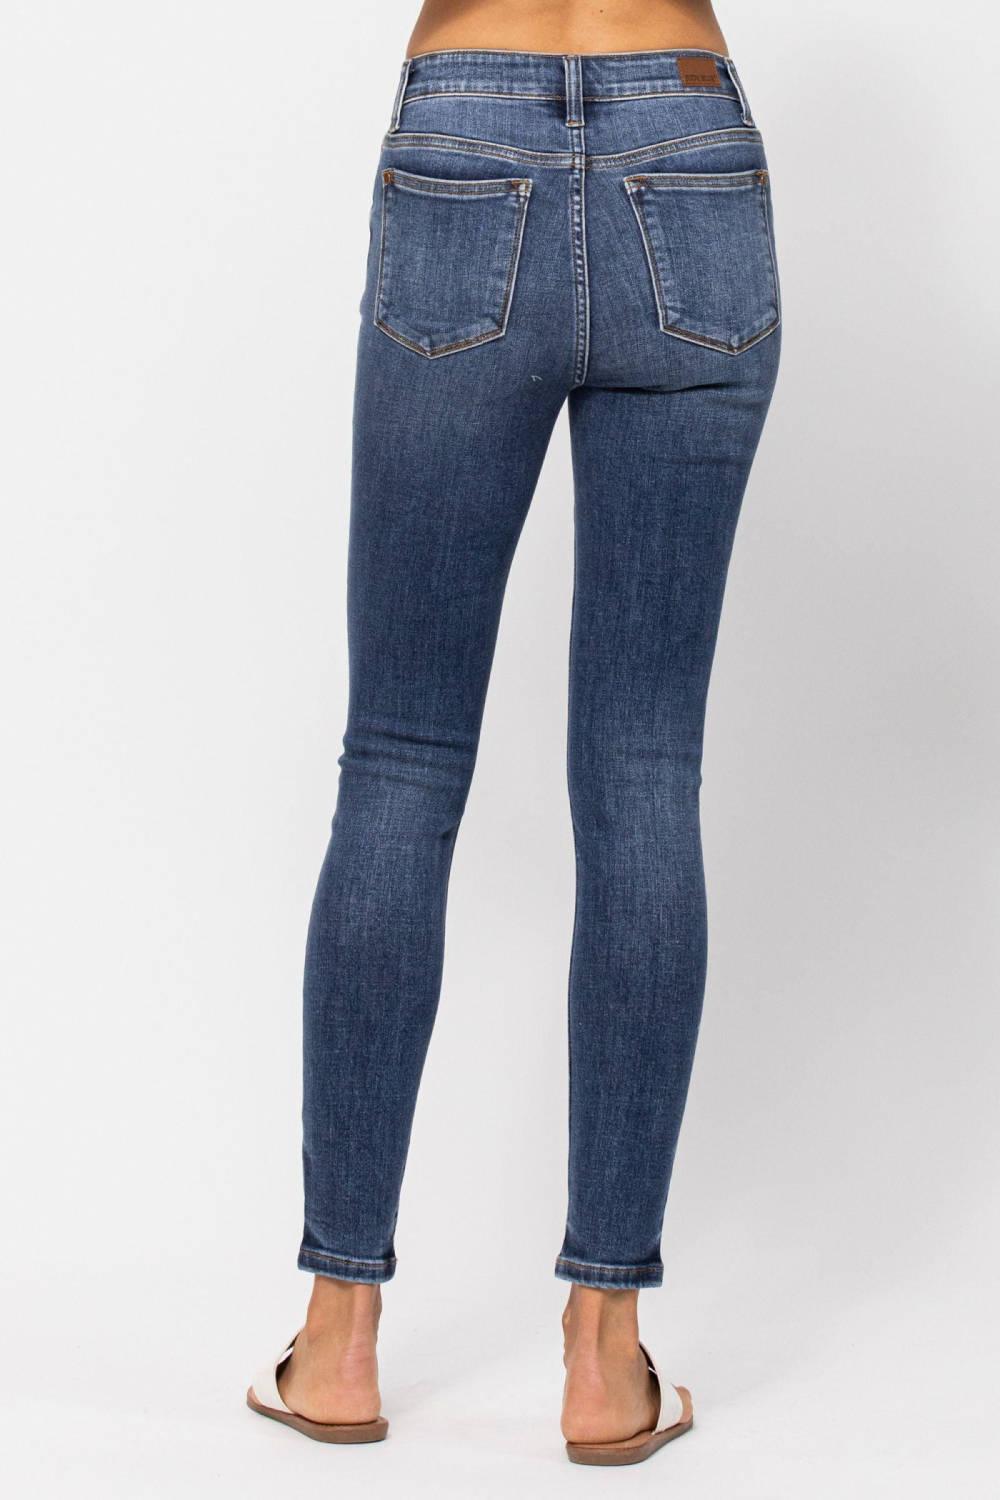 Judy Blue Mid-Rise Handstand Classic Skinny - Strawberry Moon Boutique